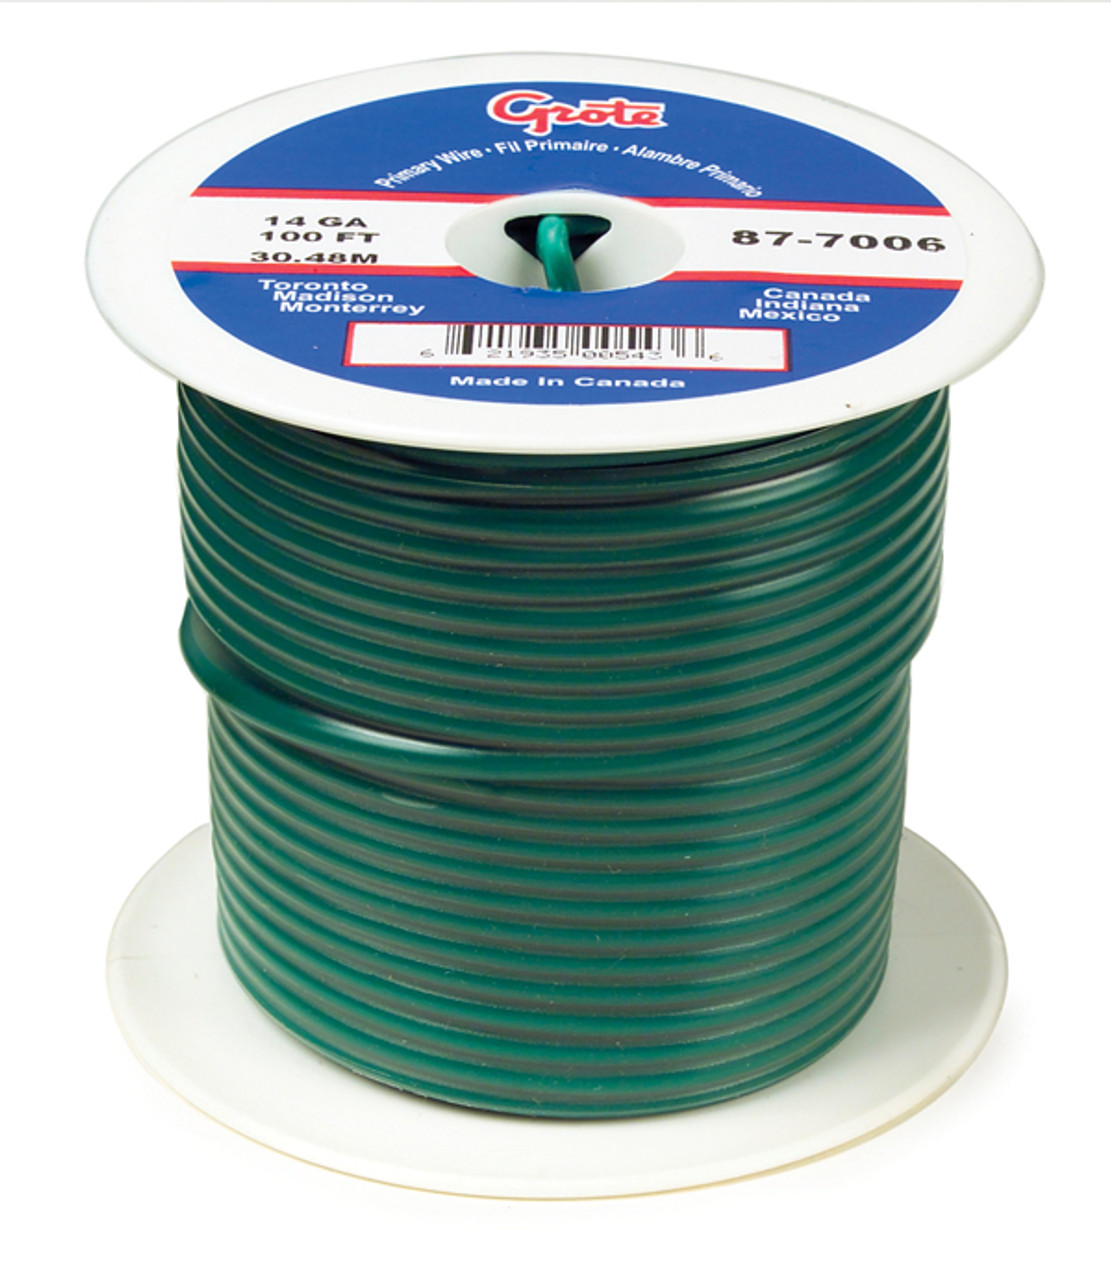 16 AWG General Purpose Thermo Plastic Wire @ 100' - Green  87-8006